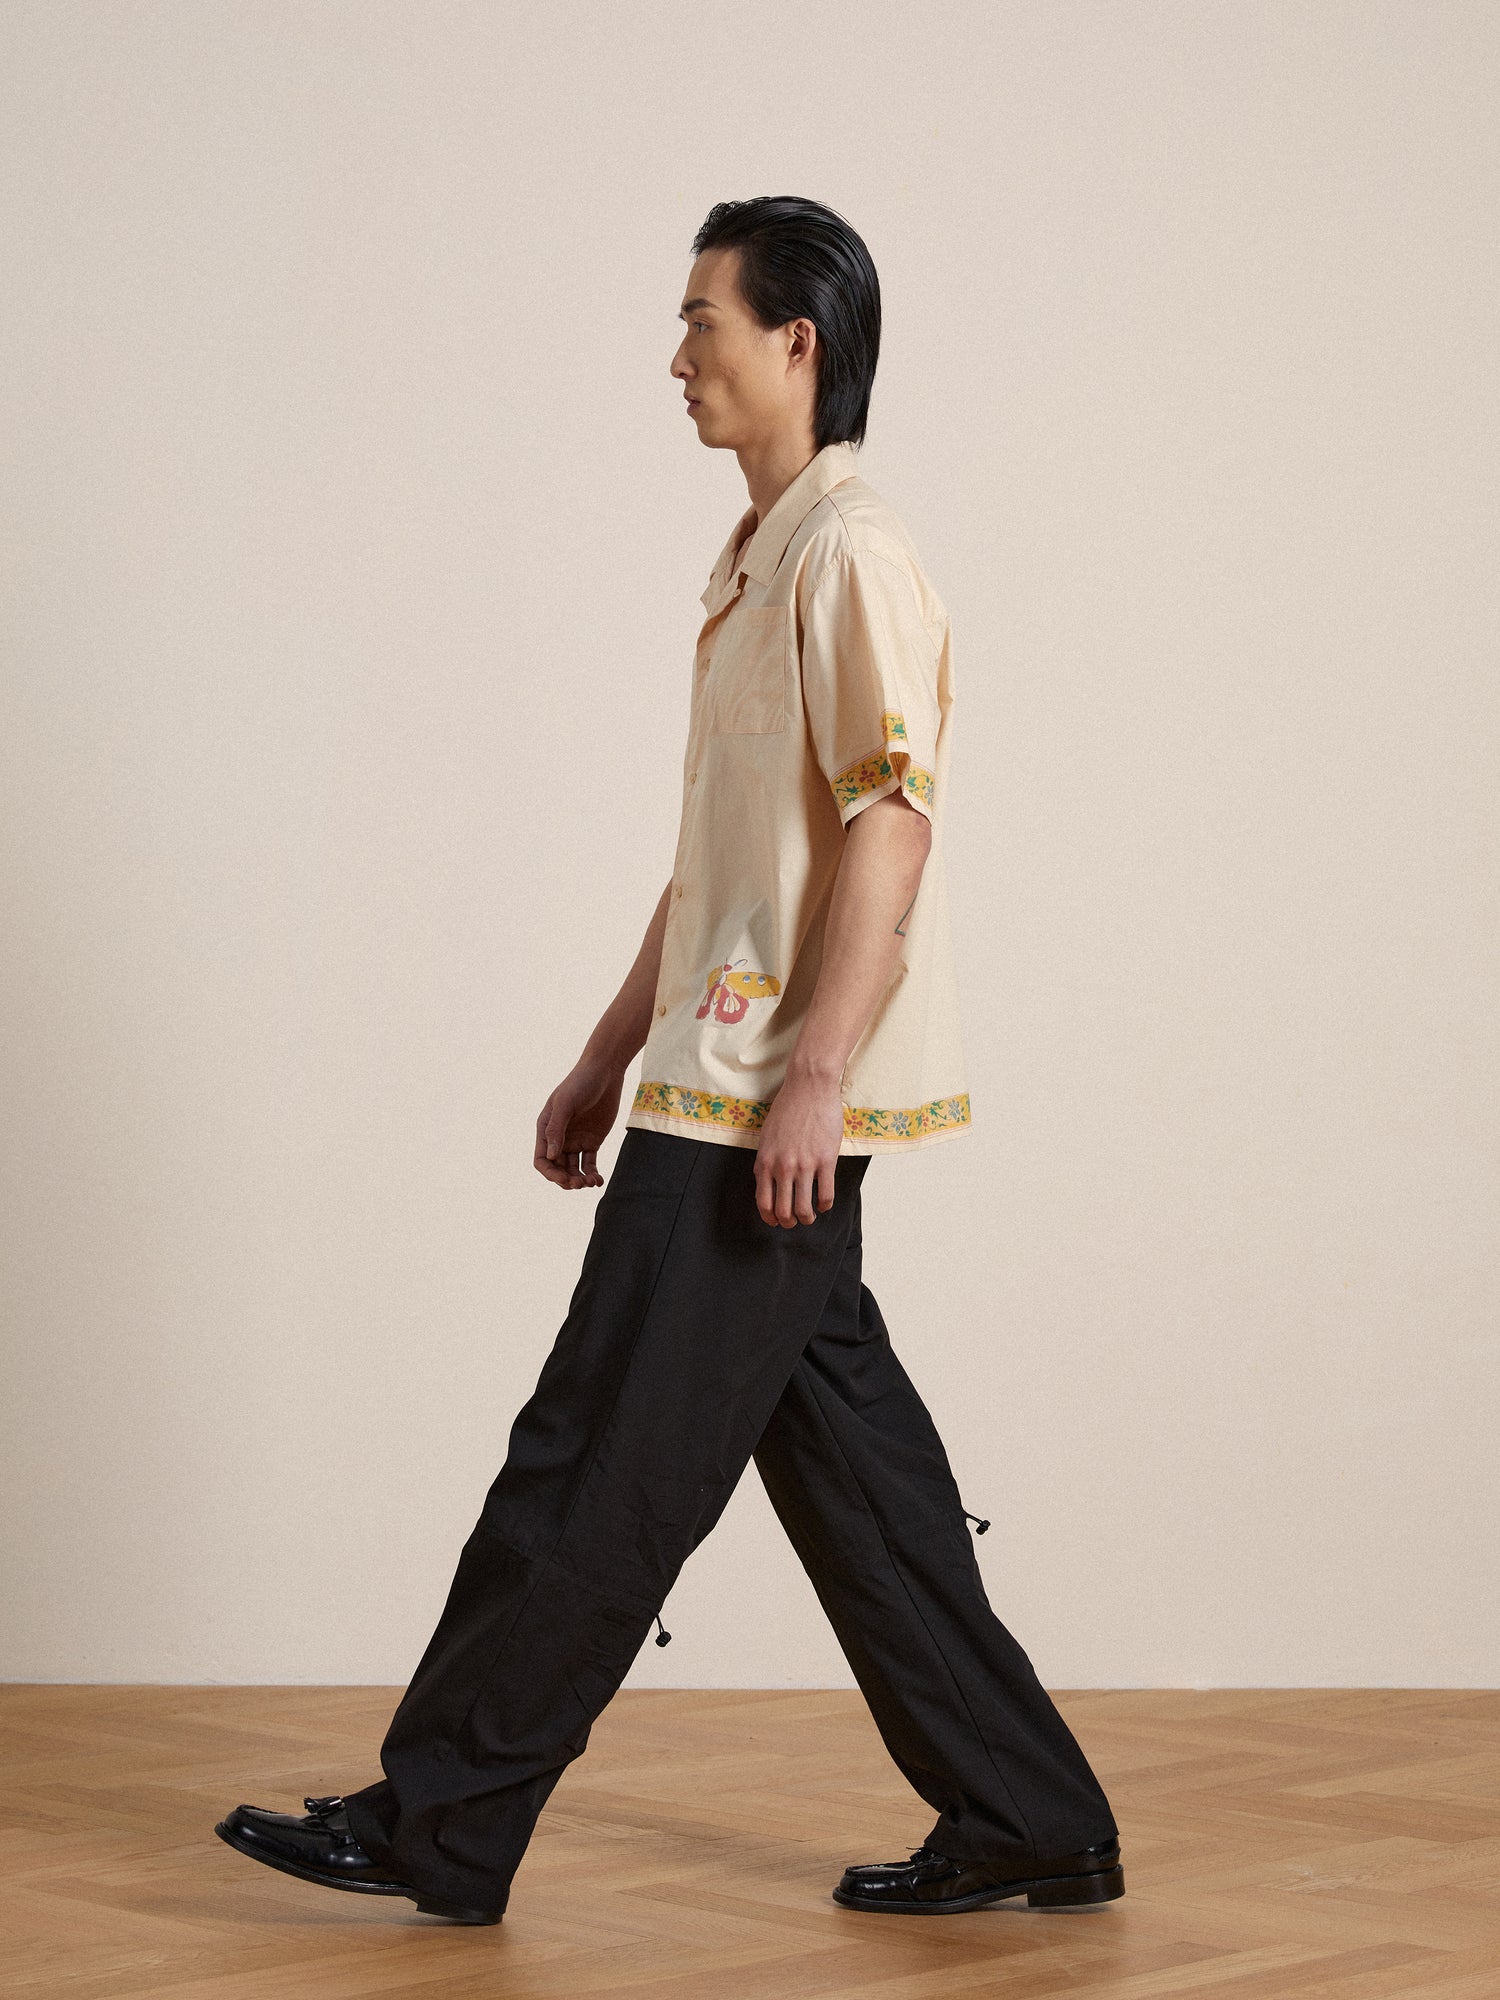 A man in a Found Moth Camp Shirt and black pants walking on a wooden floor.